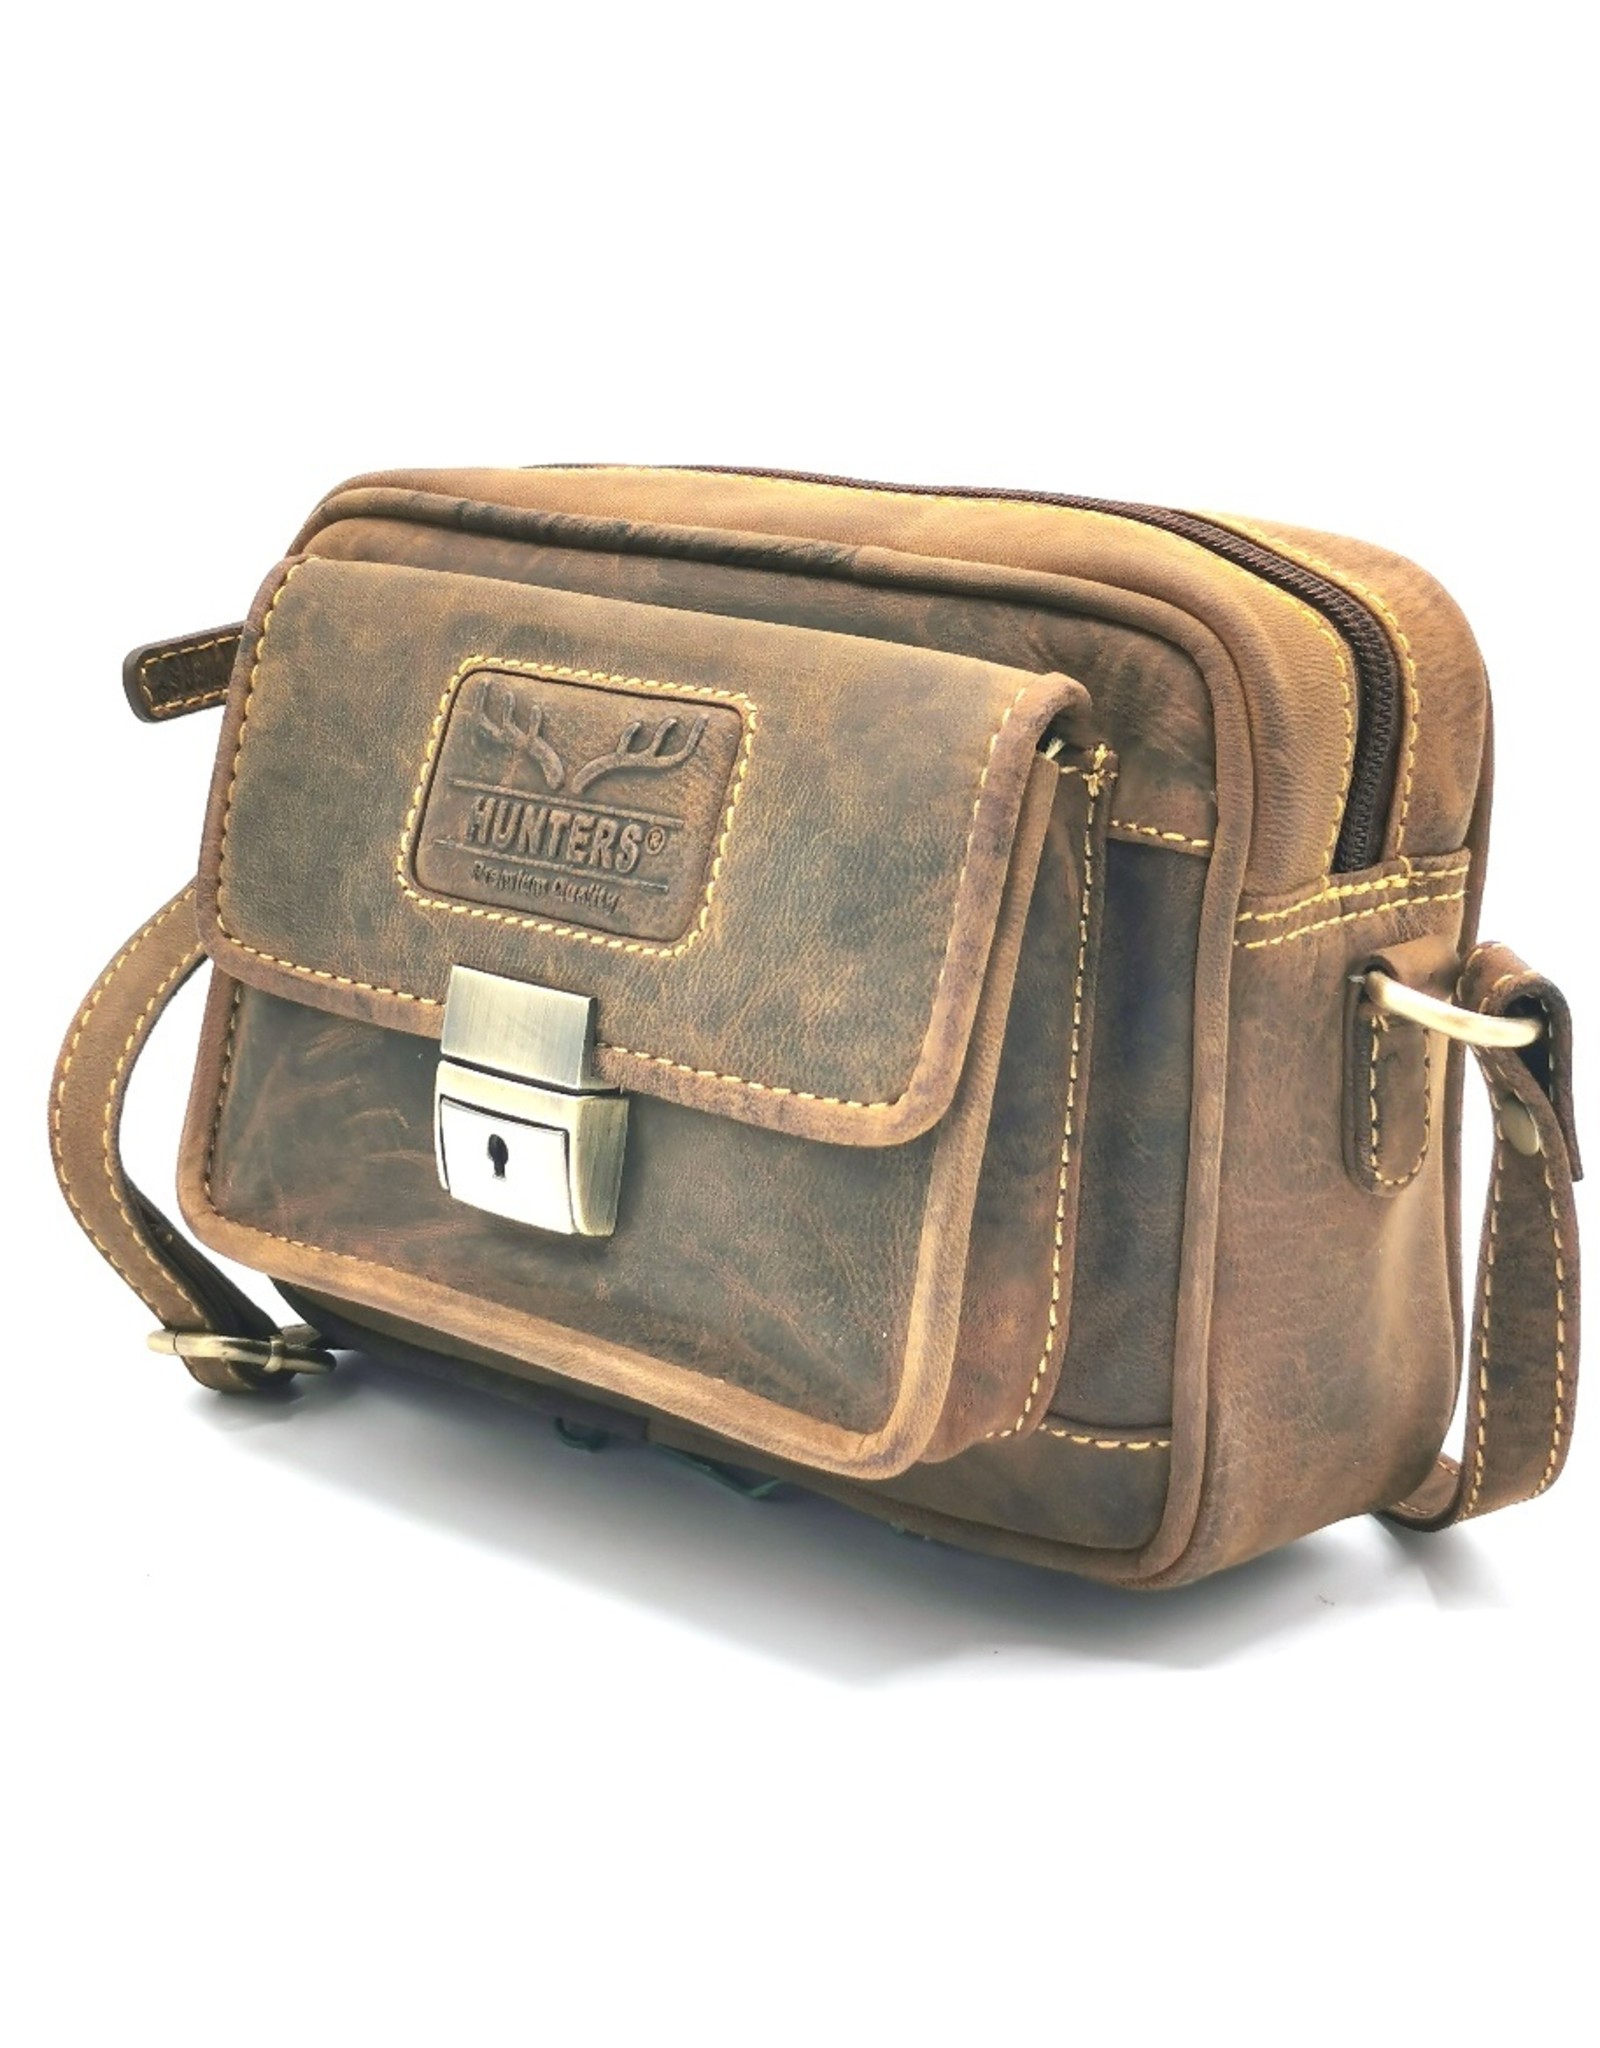 Hunters Leather Shoulder bags  Leather crossbody bags - Hunters Shoulder bag with Front pocket and Key